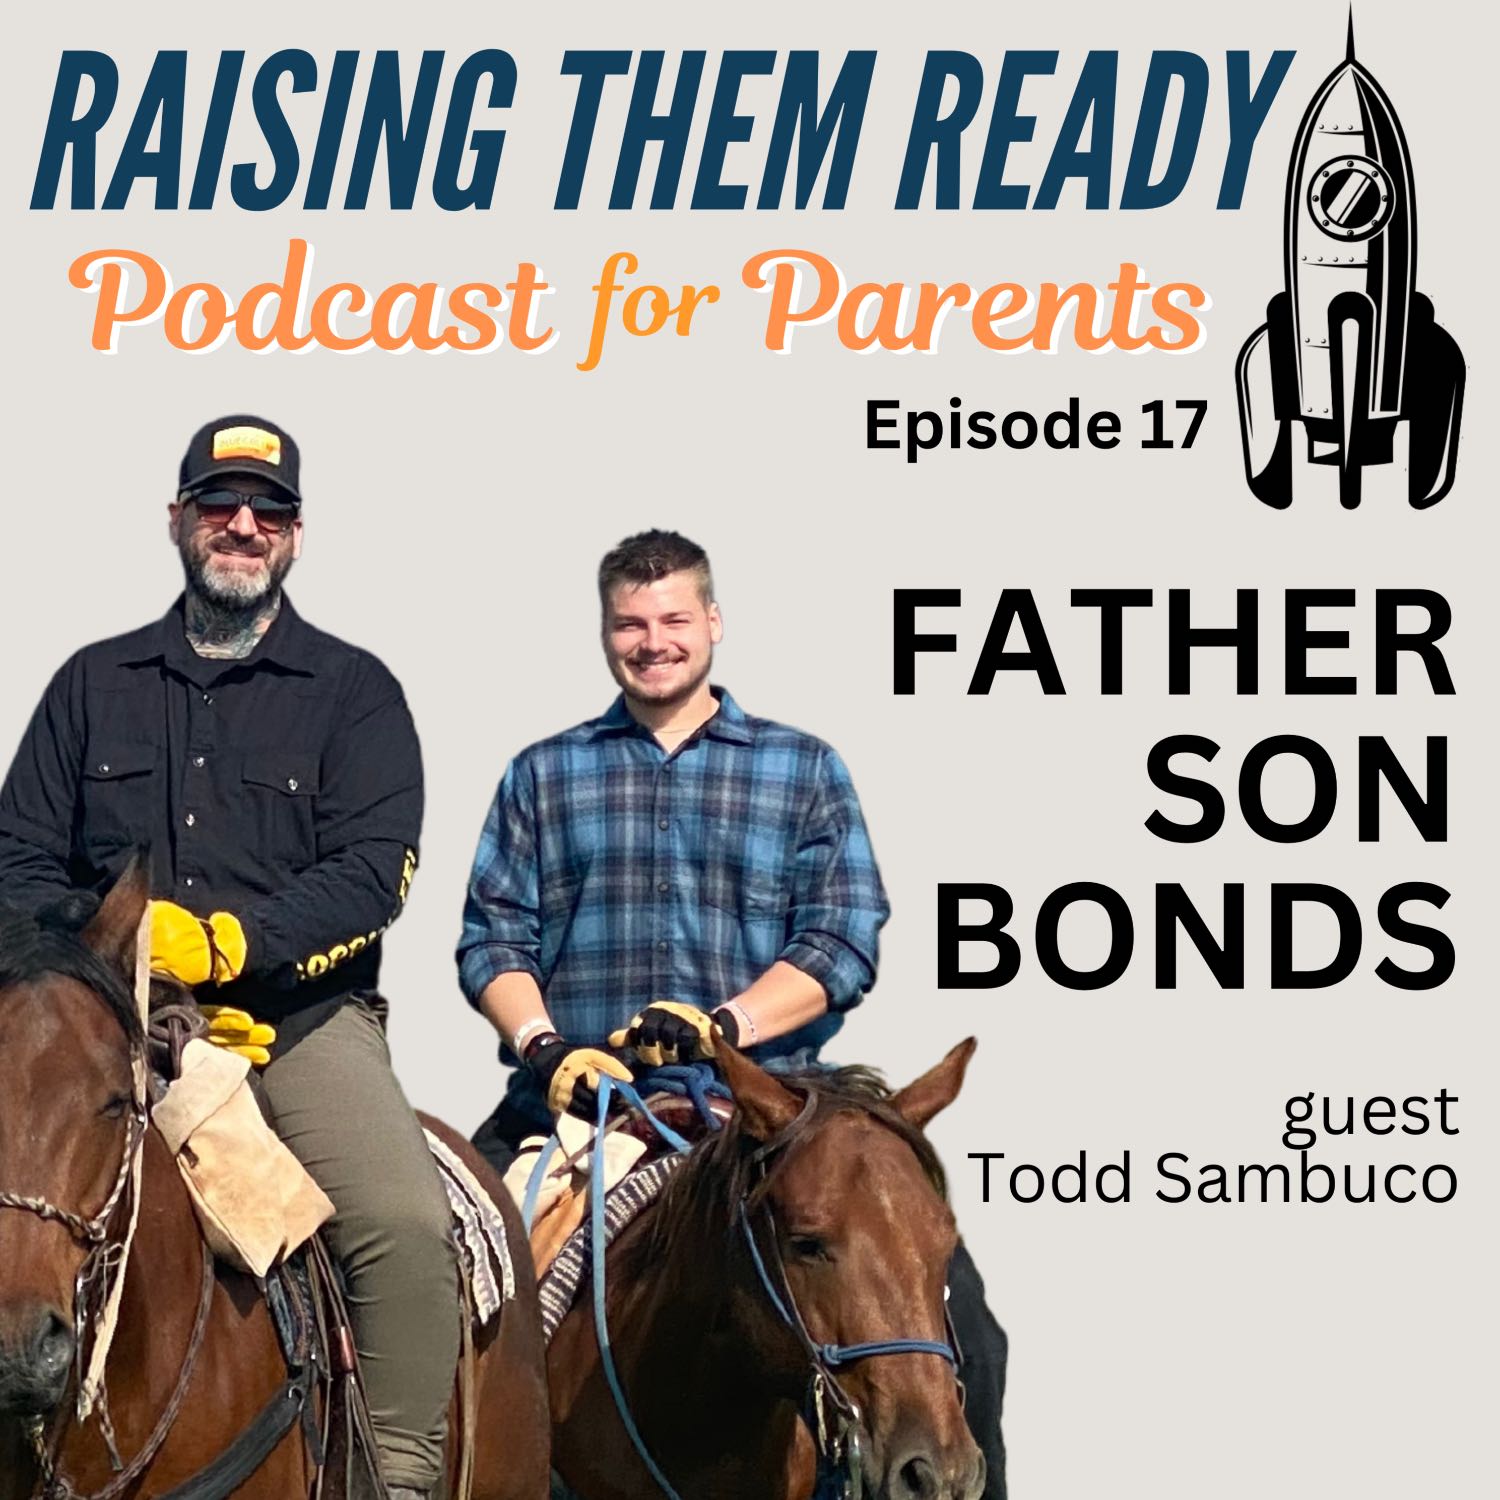 BONDING! Father Son Bonds, with guest Todd Sambuco